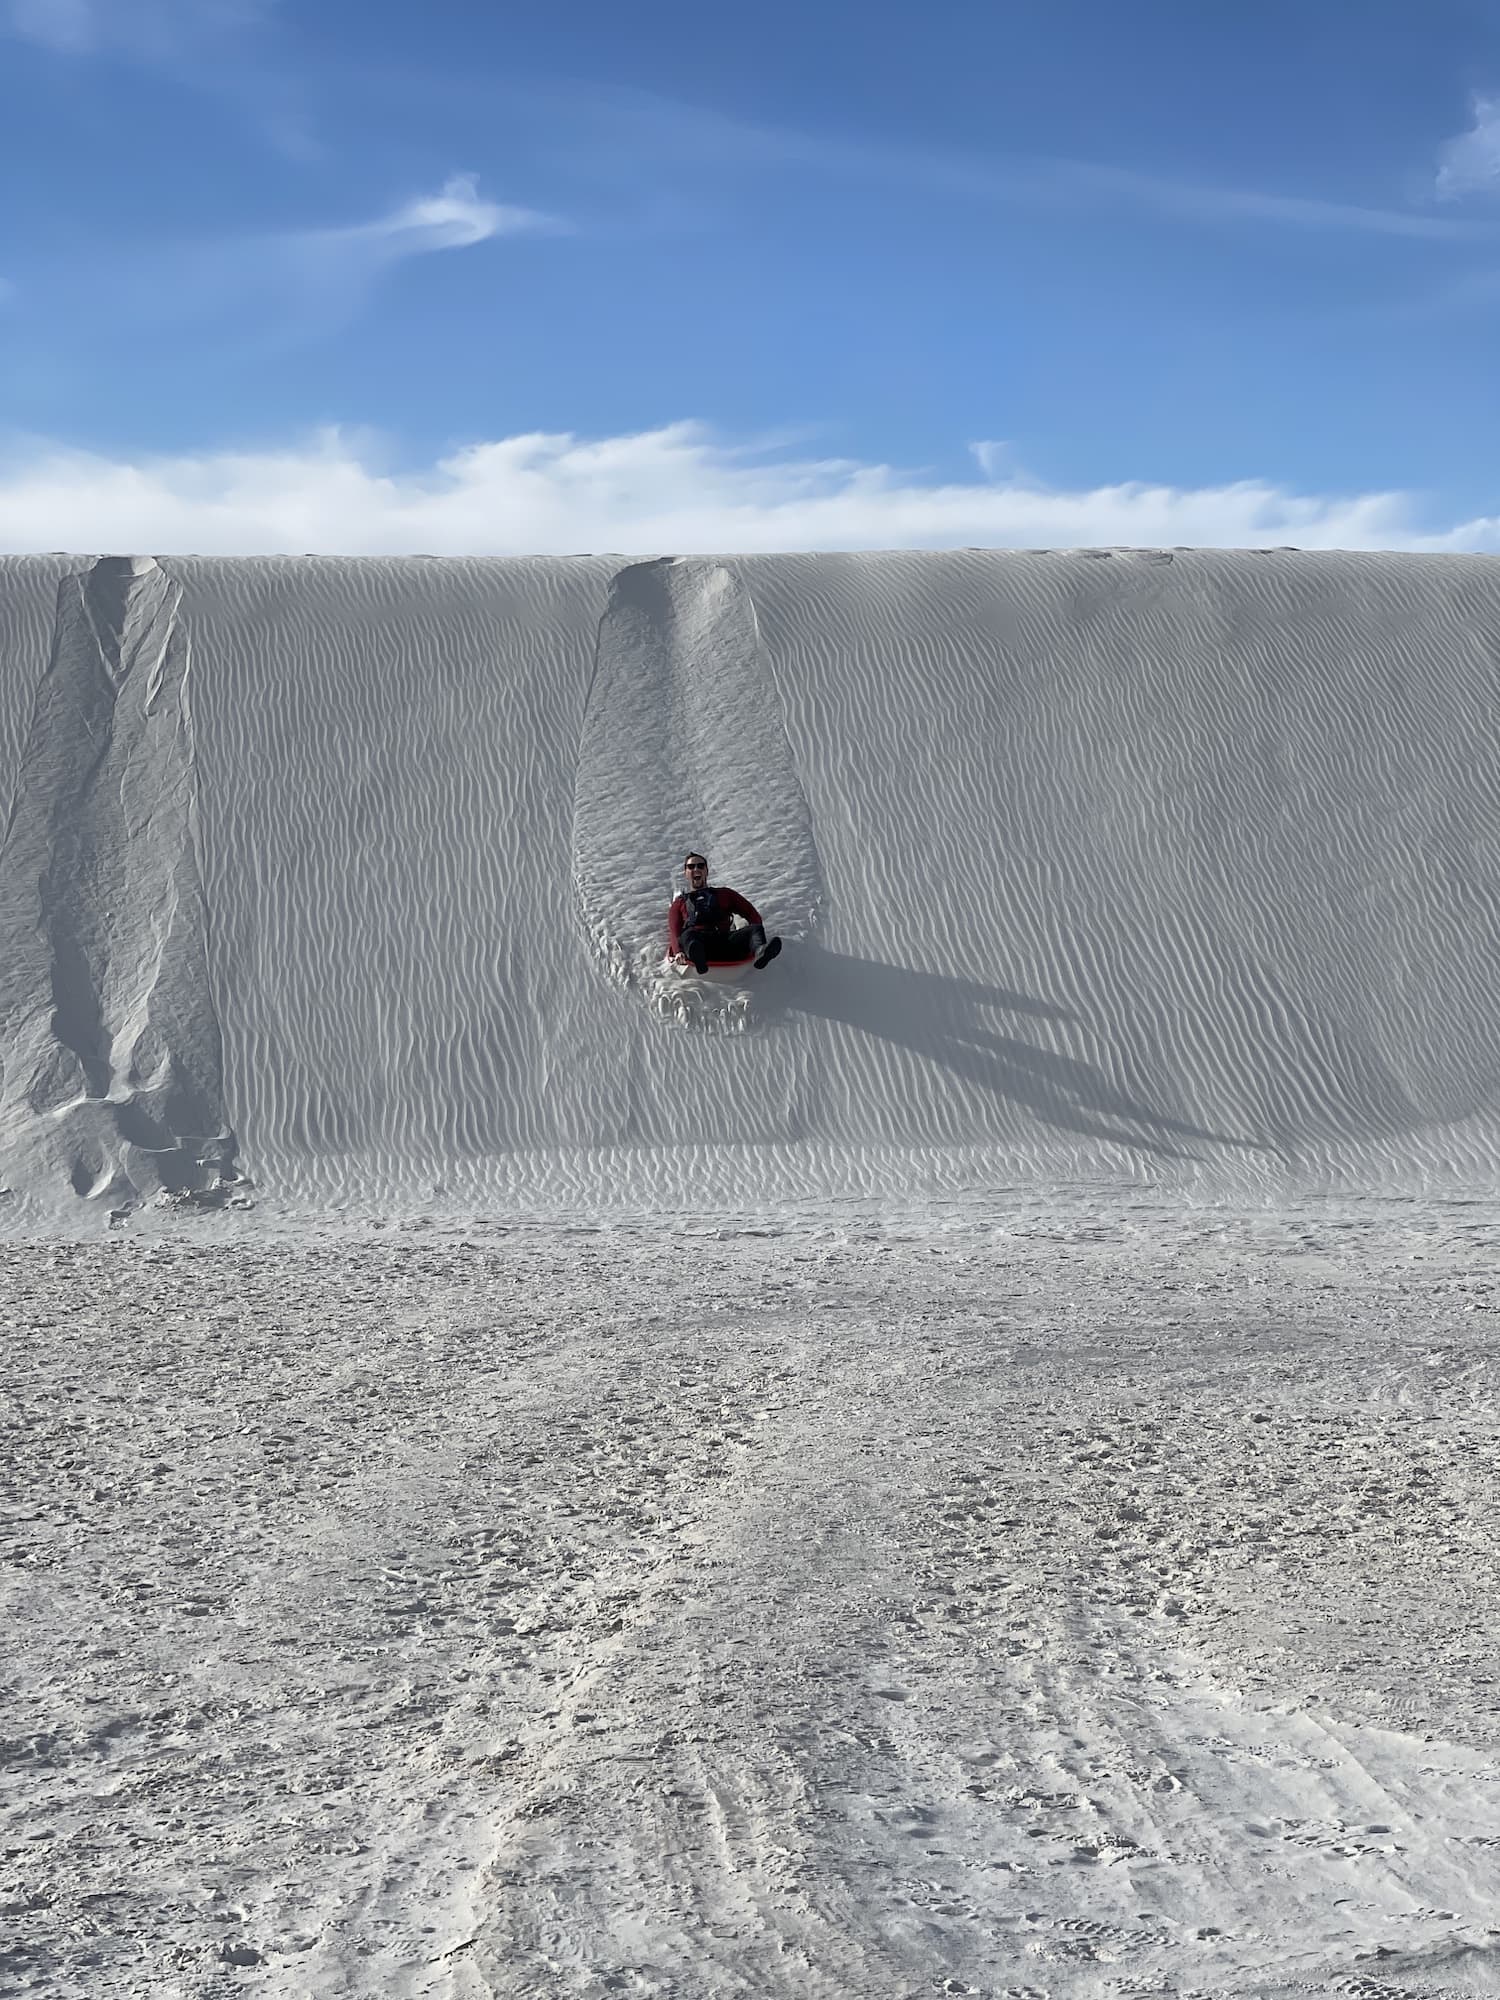 Dylan sledding down the dune with smile on his face